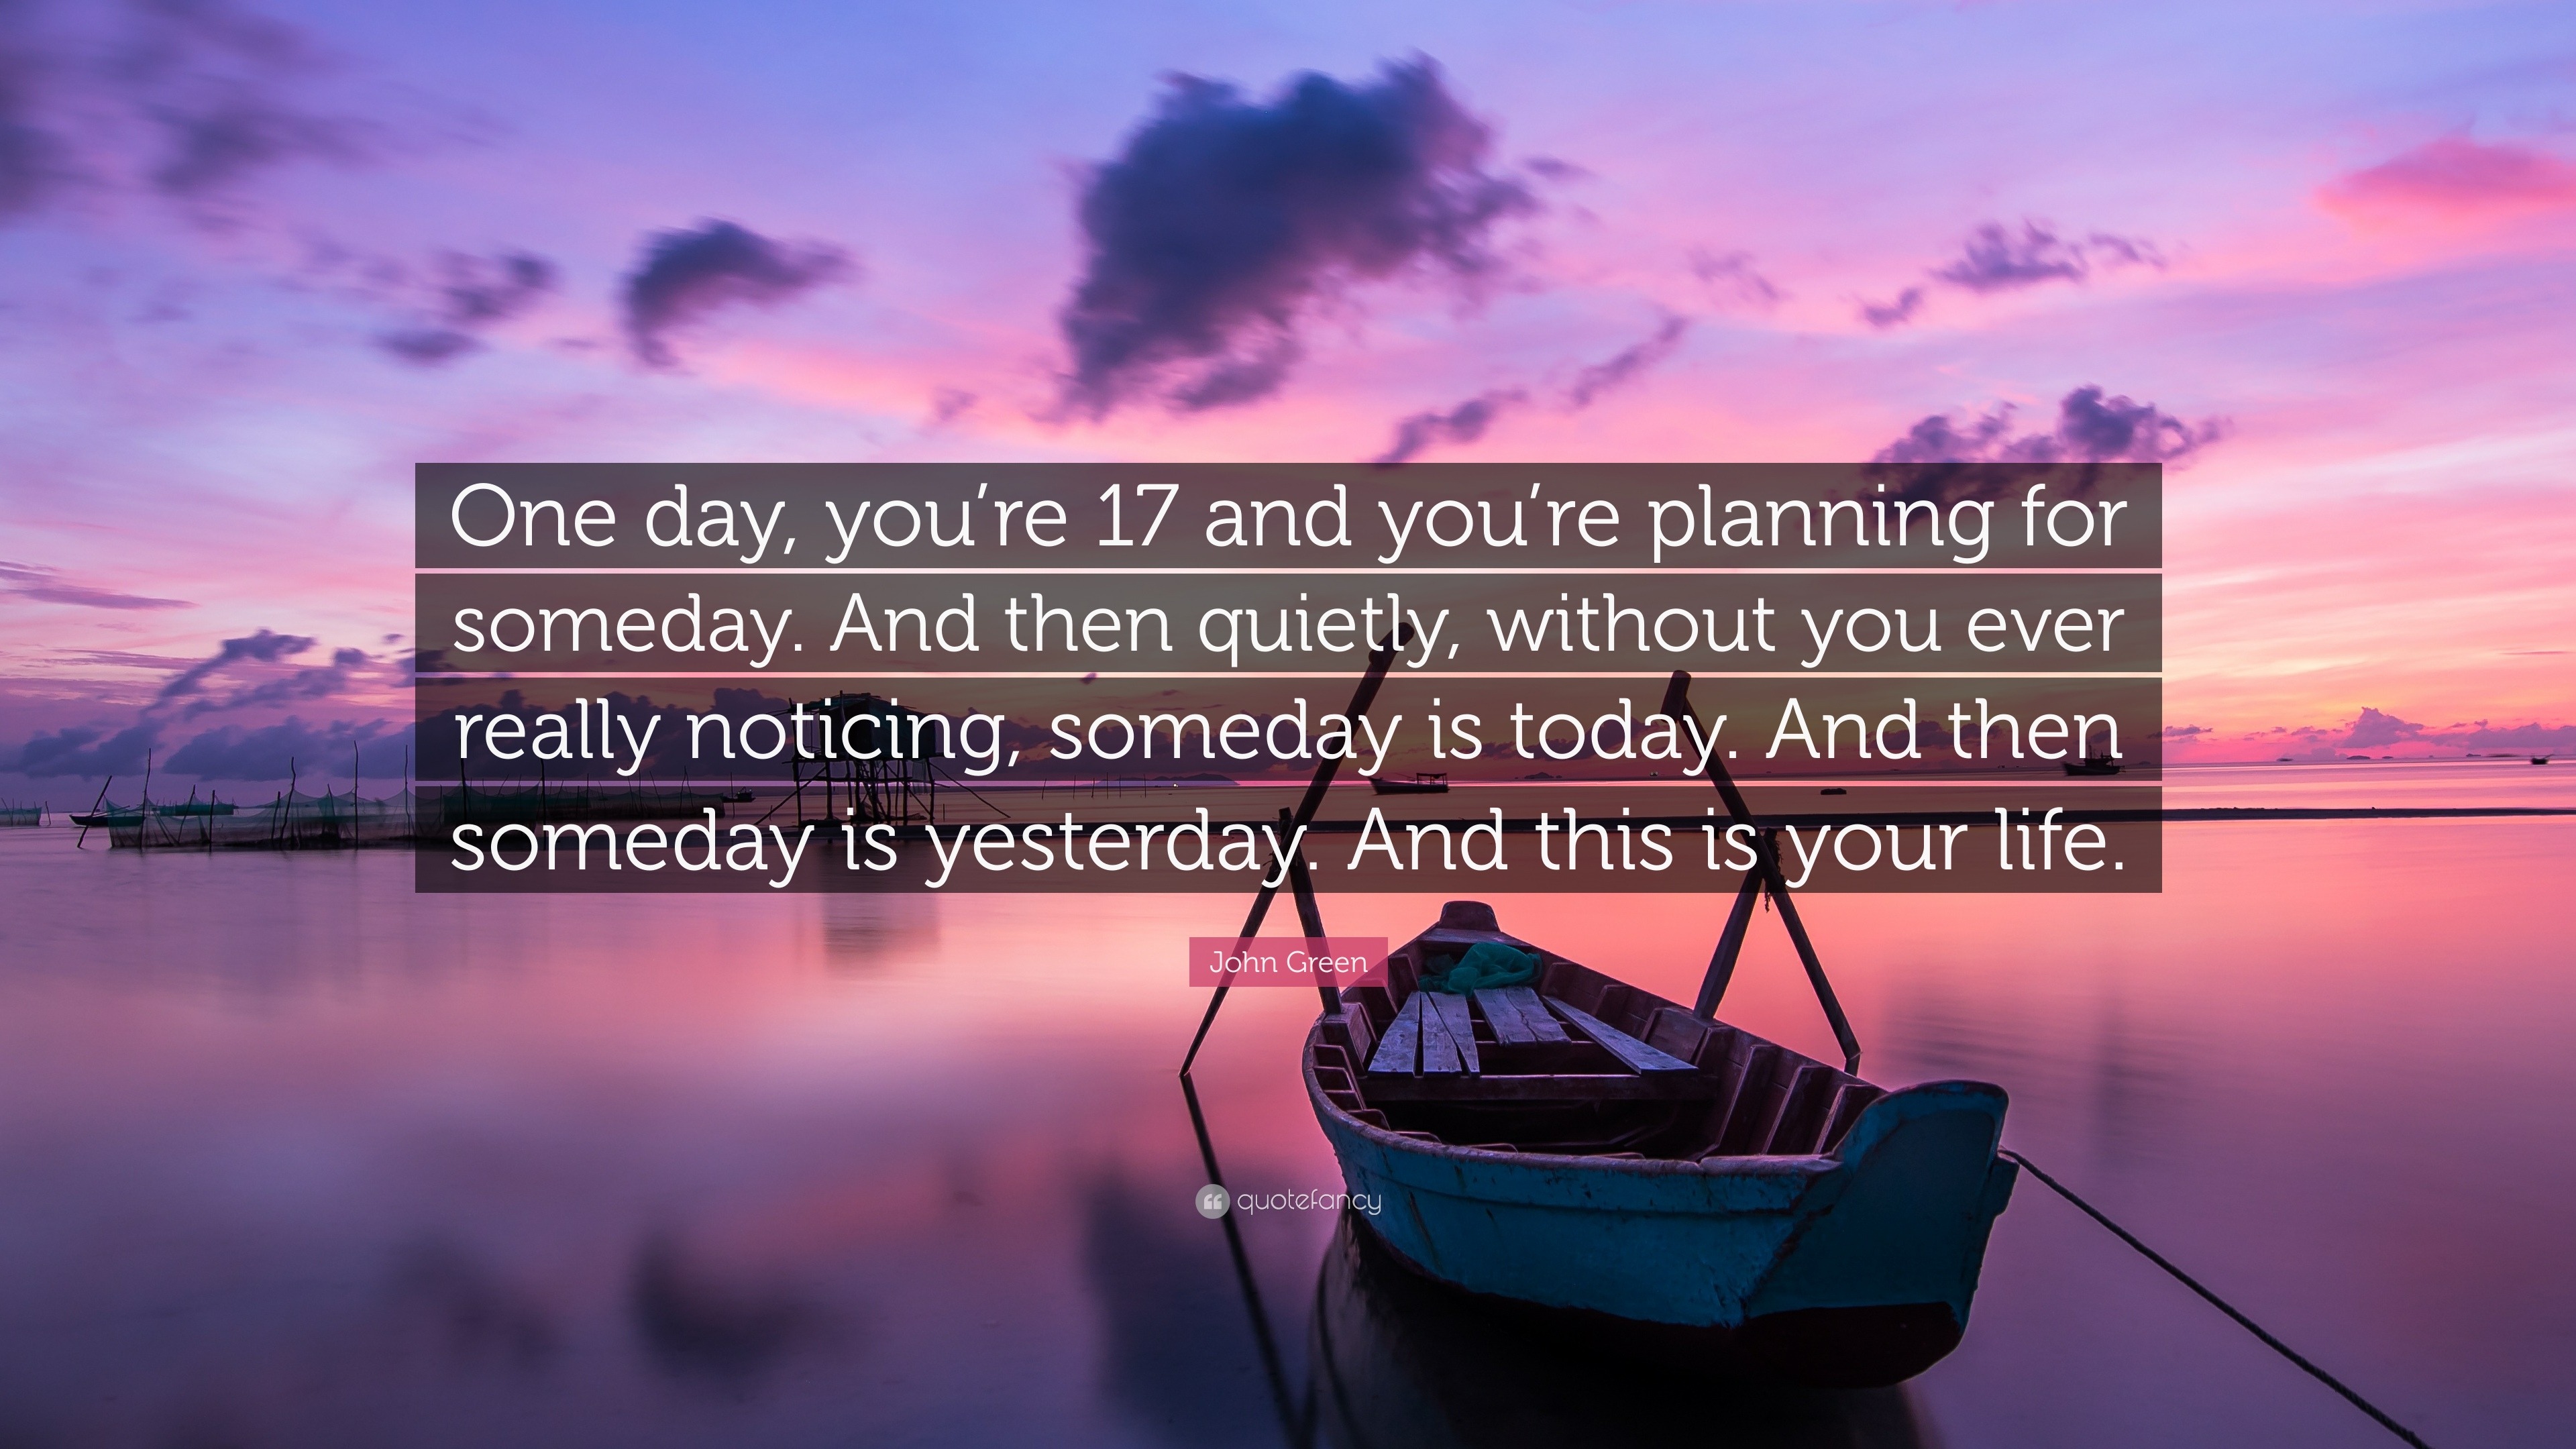 John Green Quote: "One day, you're 17 and you're planning ...